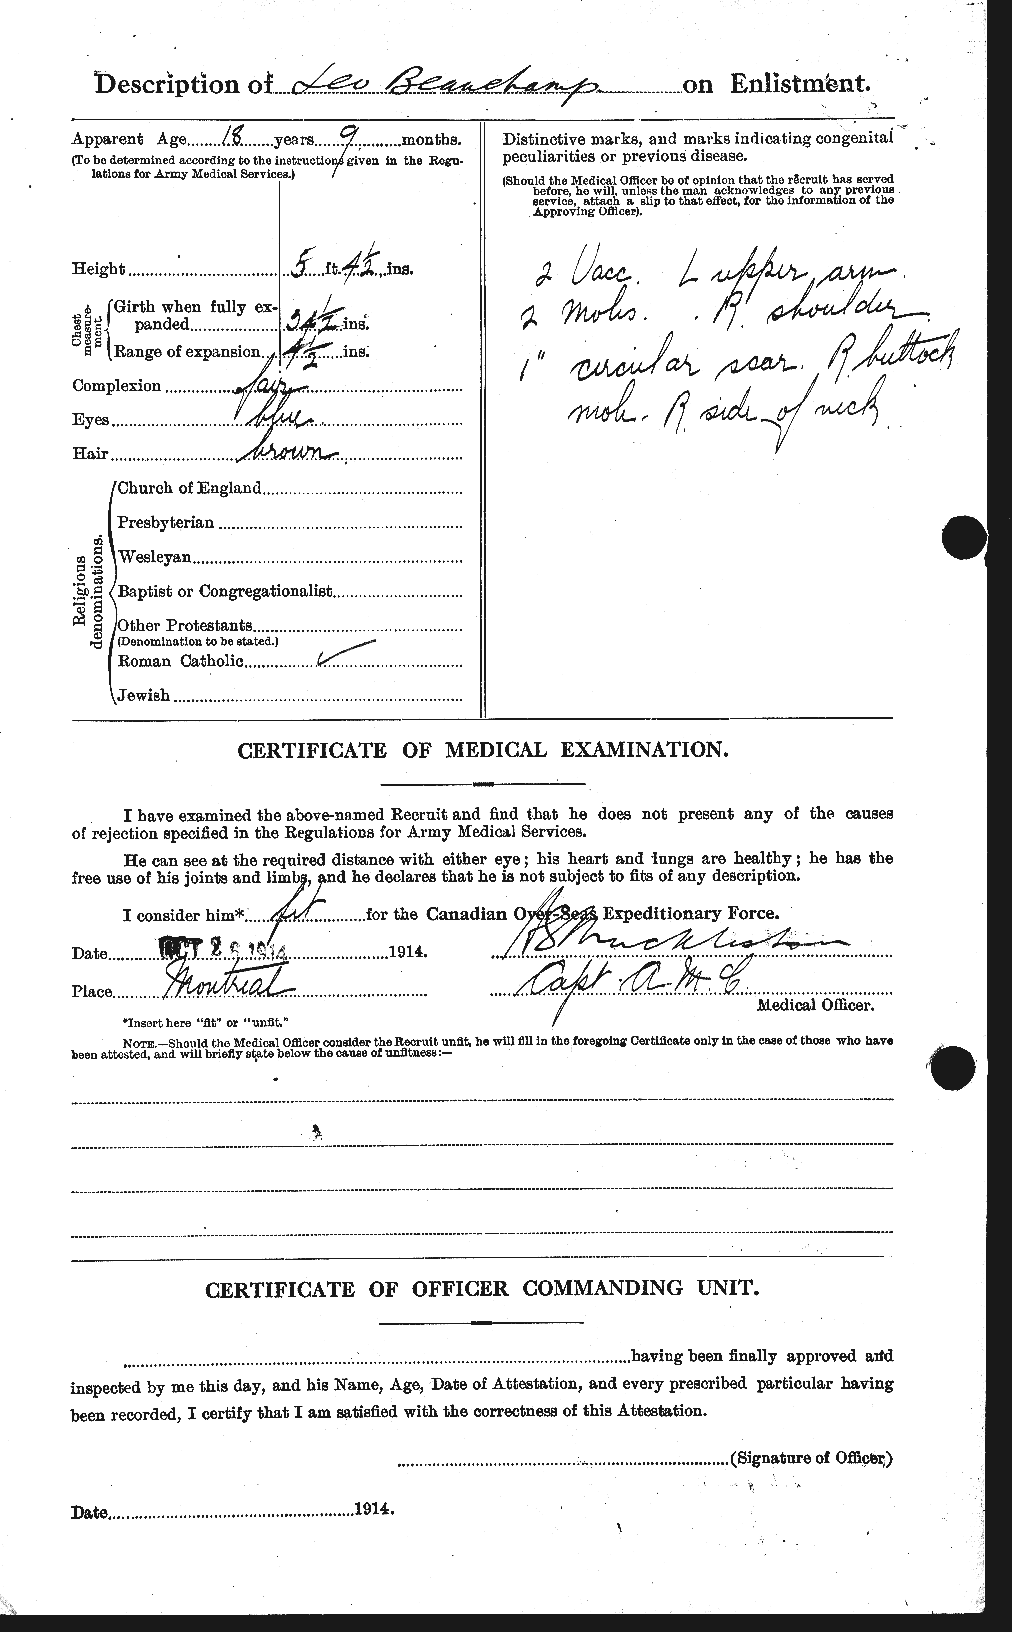 Personnel Records of the First World War - CEF 231002b